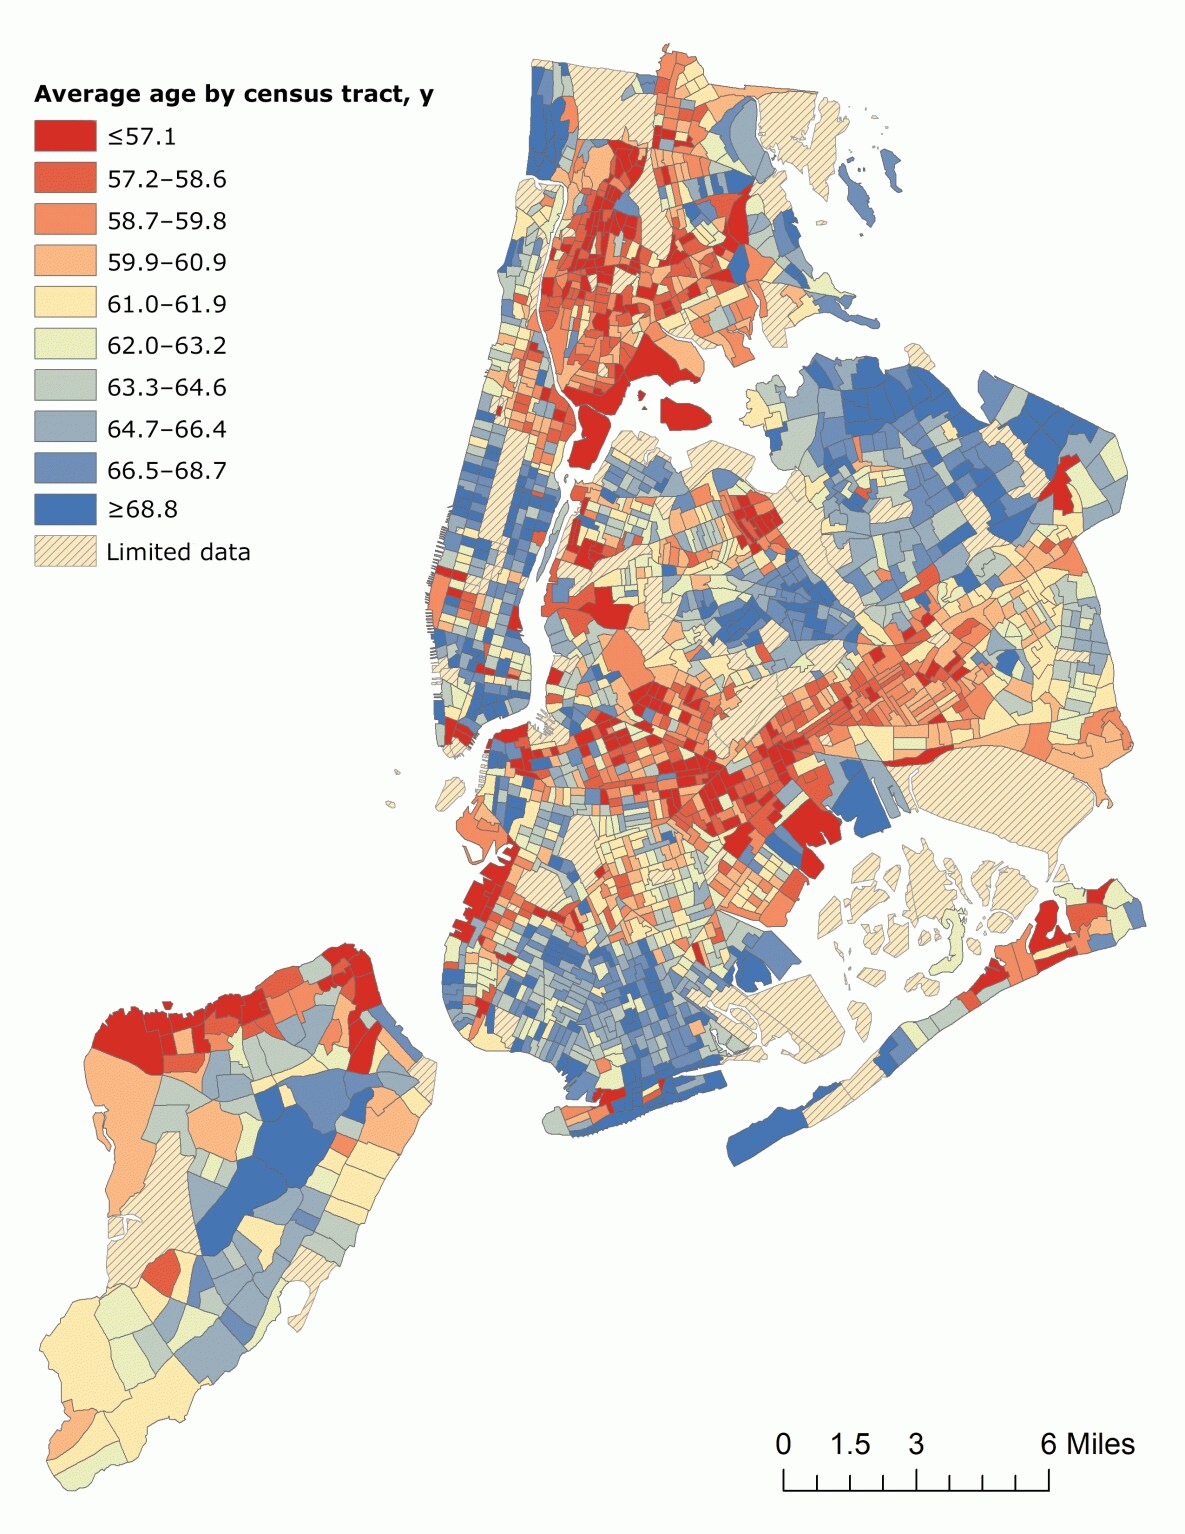 Average age of patients with type 2 diabetes, by census tract, among 576,306 unique patients aged 10 to 100 years who had visited an emergency department at least once from 2011 through 2015 in New York City. Data source: New York State Department of Health Statewide Planning and Research Cooperative System (18). 